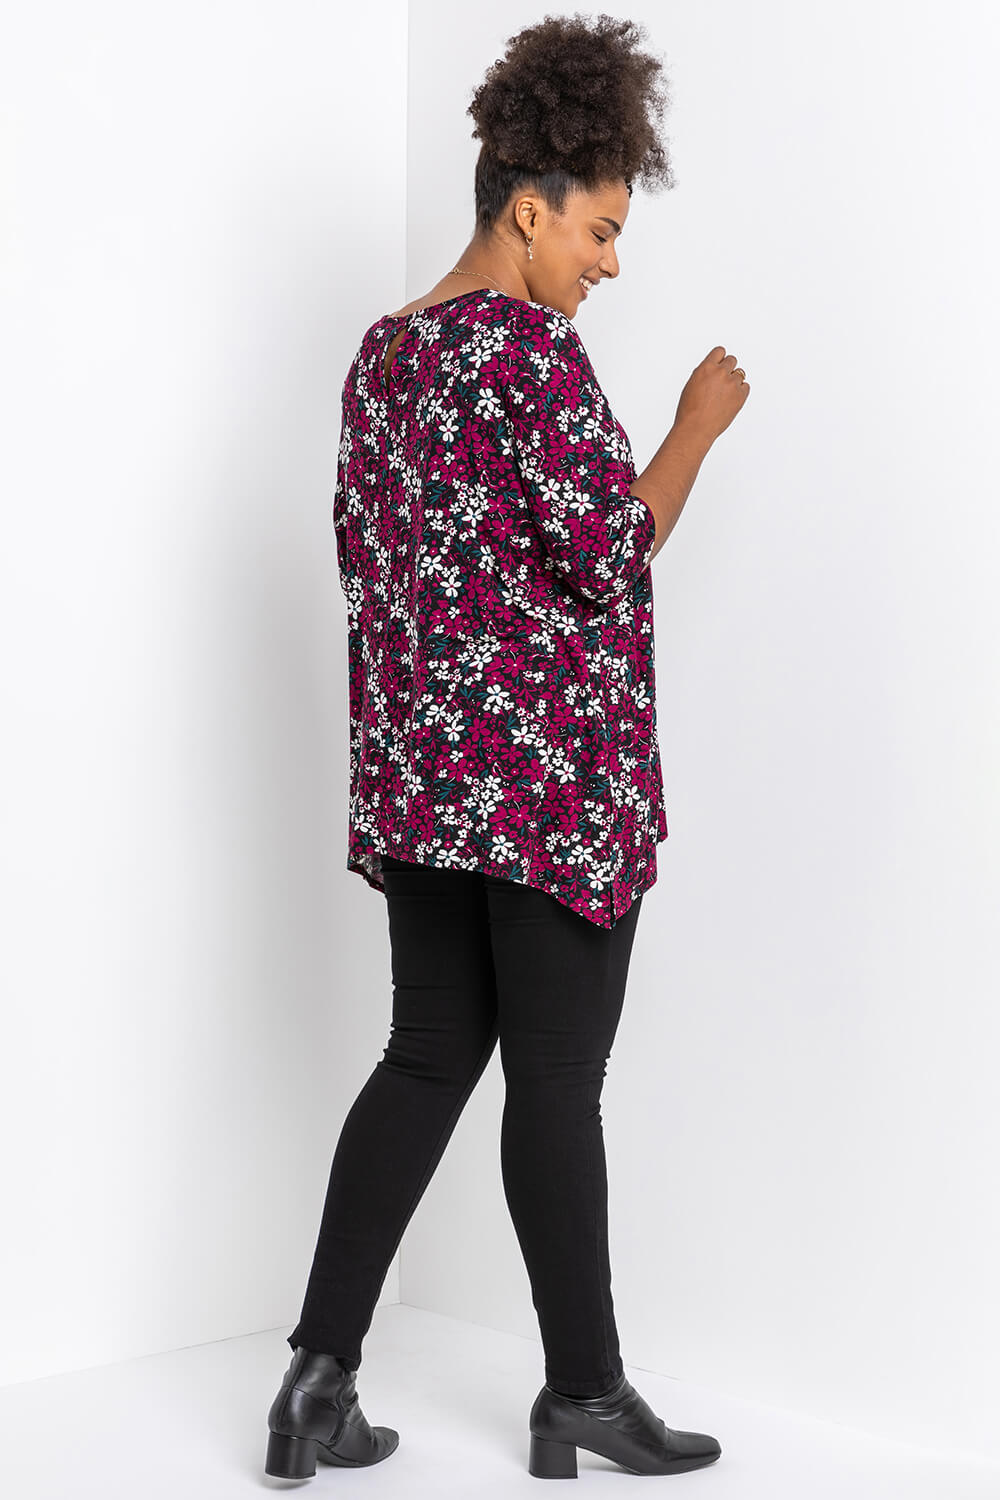 Maroon Curve Floral Print Tunic Top, Image 2 of 4